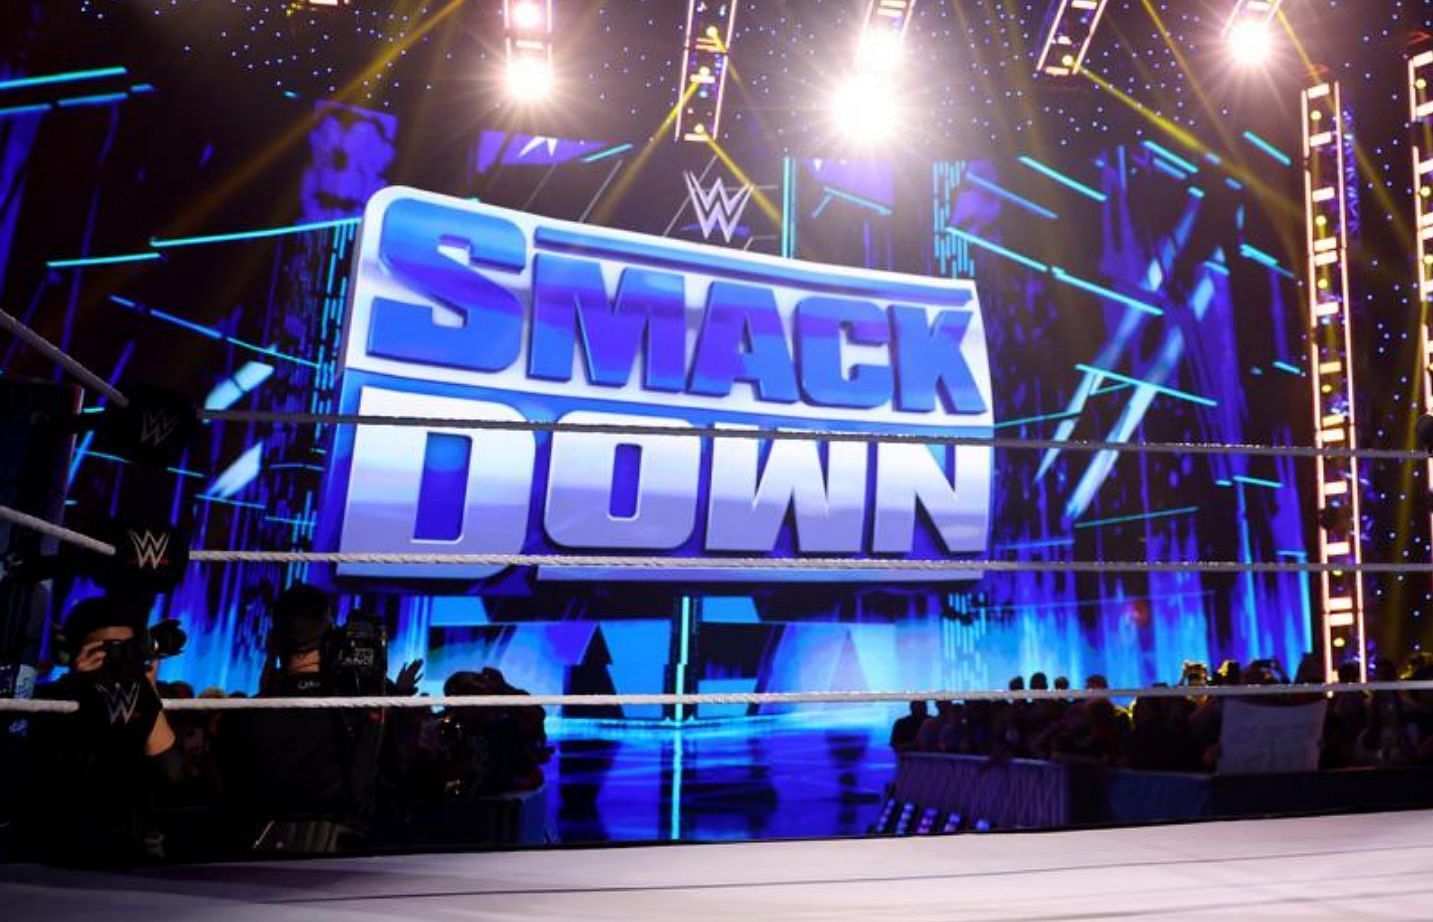 SmackDown has changed a bit over the last few months.